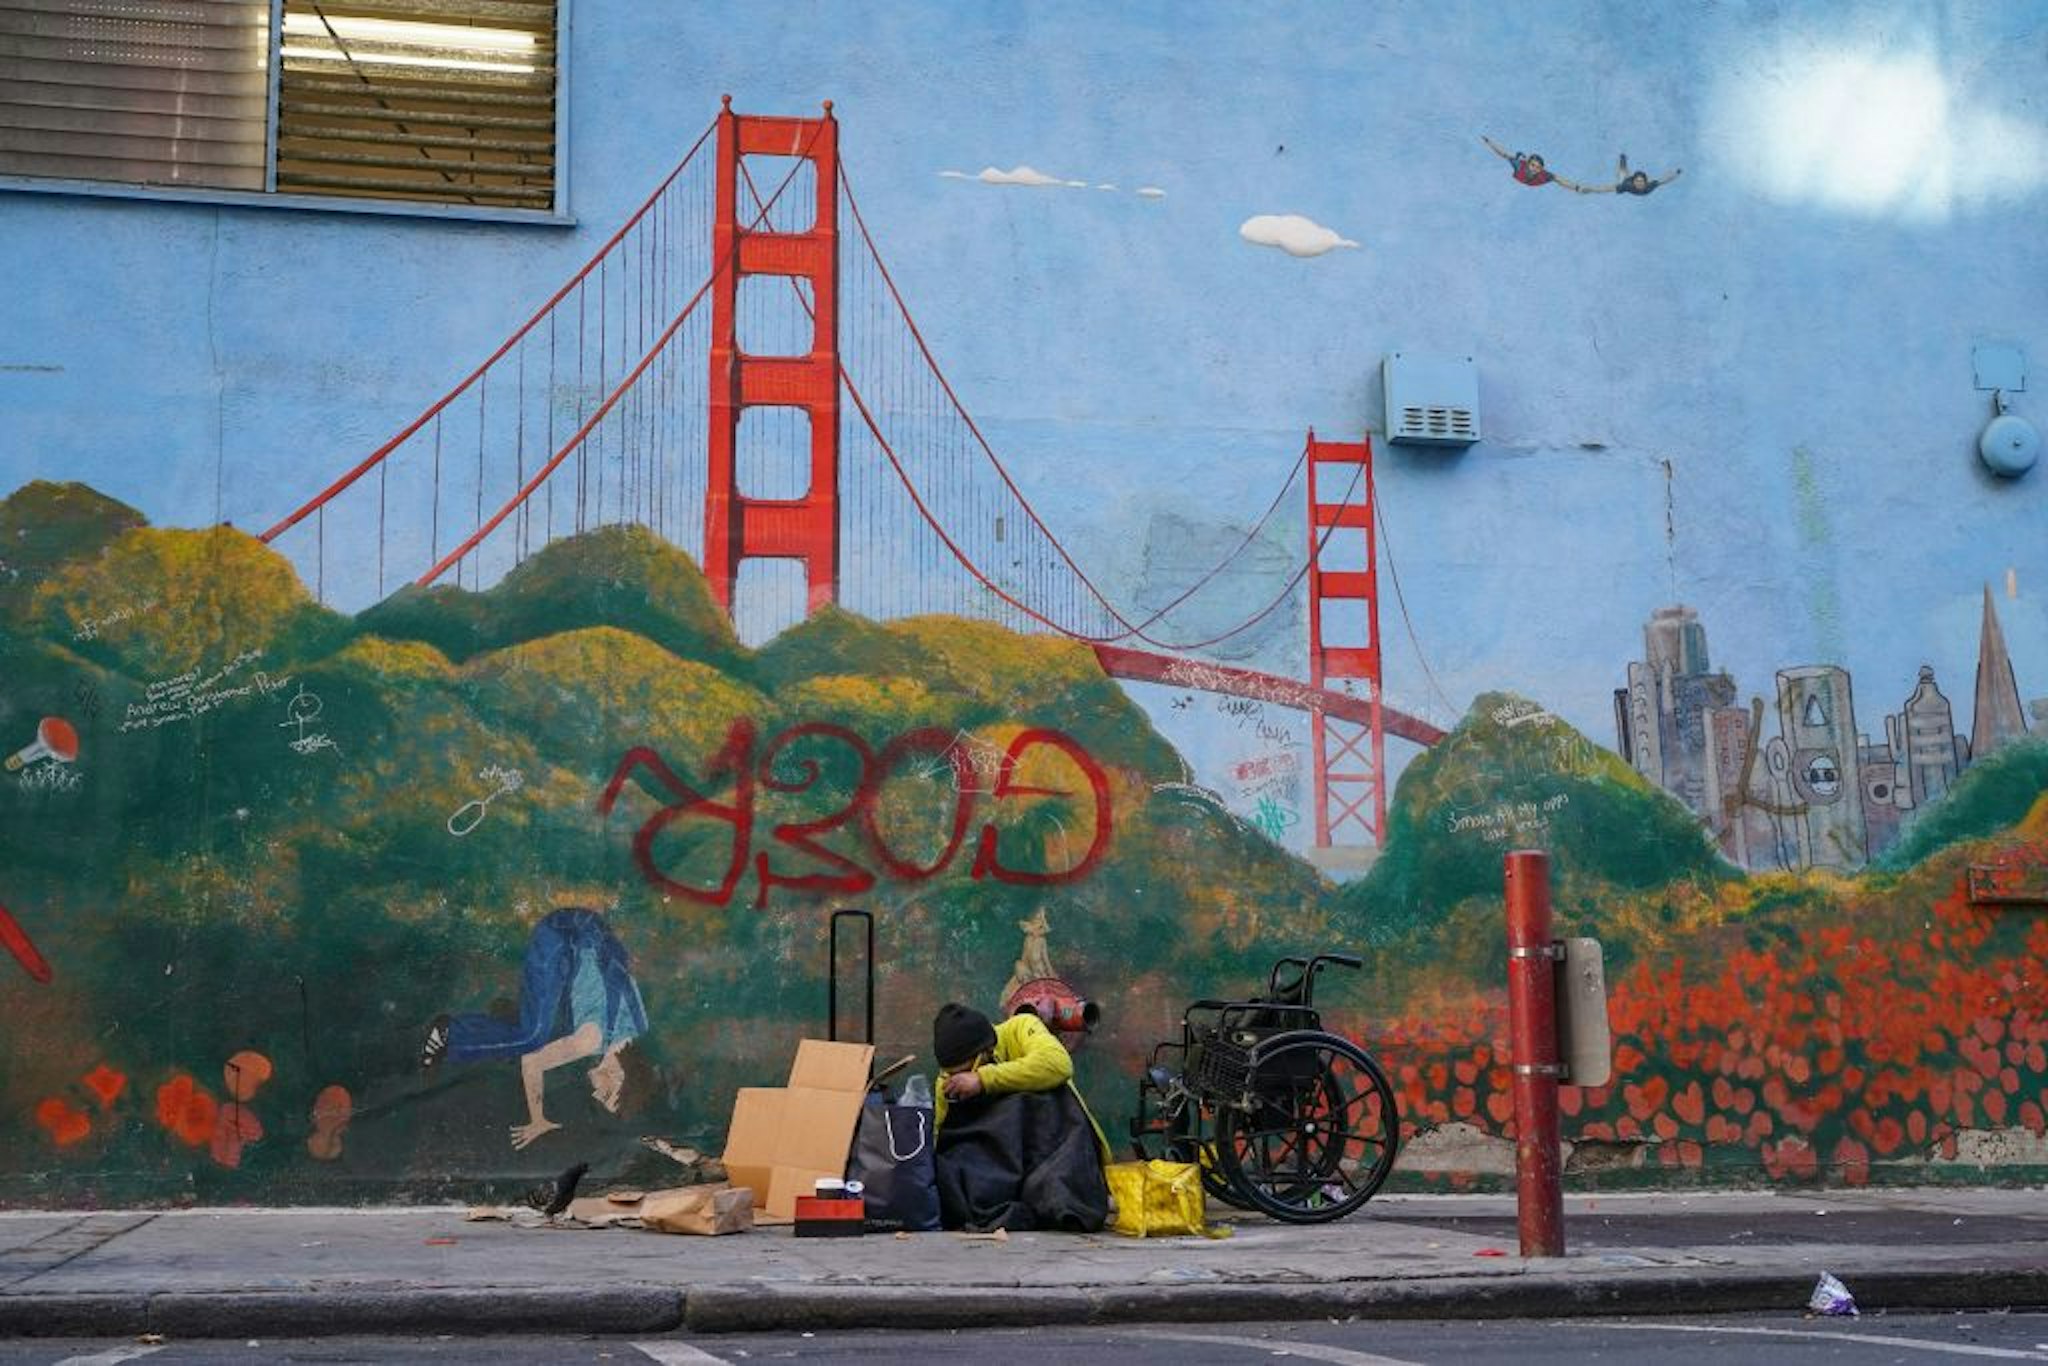 A homeless person lies against a mural of the Golden Gate Bridge near APEC Summit headquarters on November 11, 2023 in downtown San Francisco, California. The city took steps to clean up in advance of the APEC Summit, currently taking place through November 17. (Photo by Loren Elliott / AFP) (Photo by LOREN ELLIOTT/AFP via Getty Images)